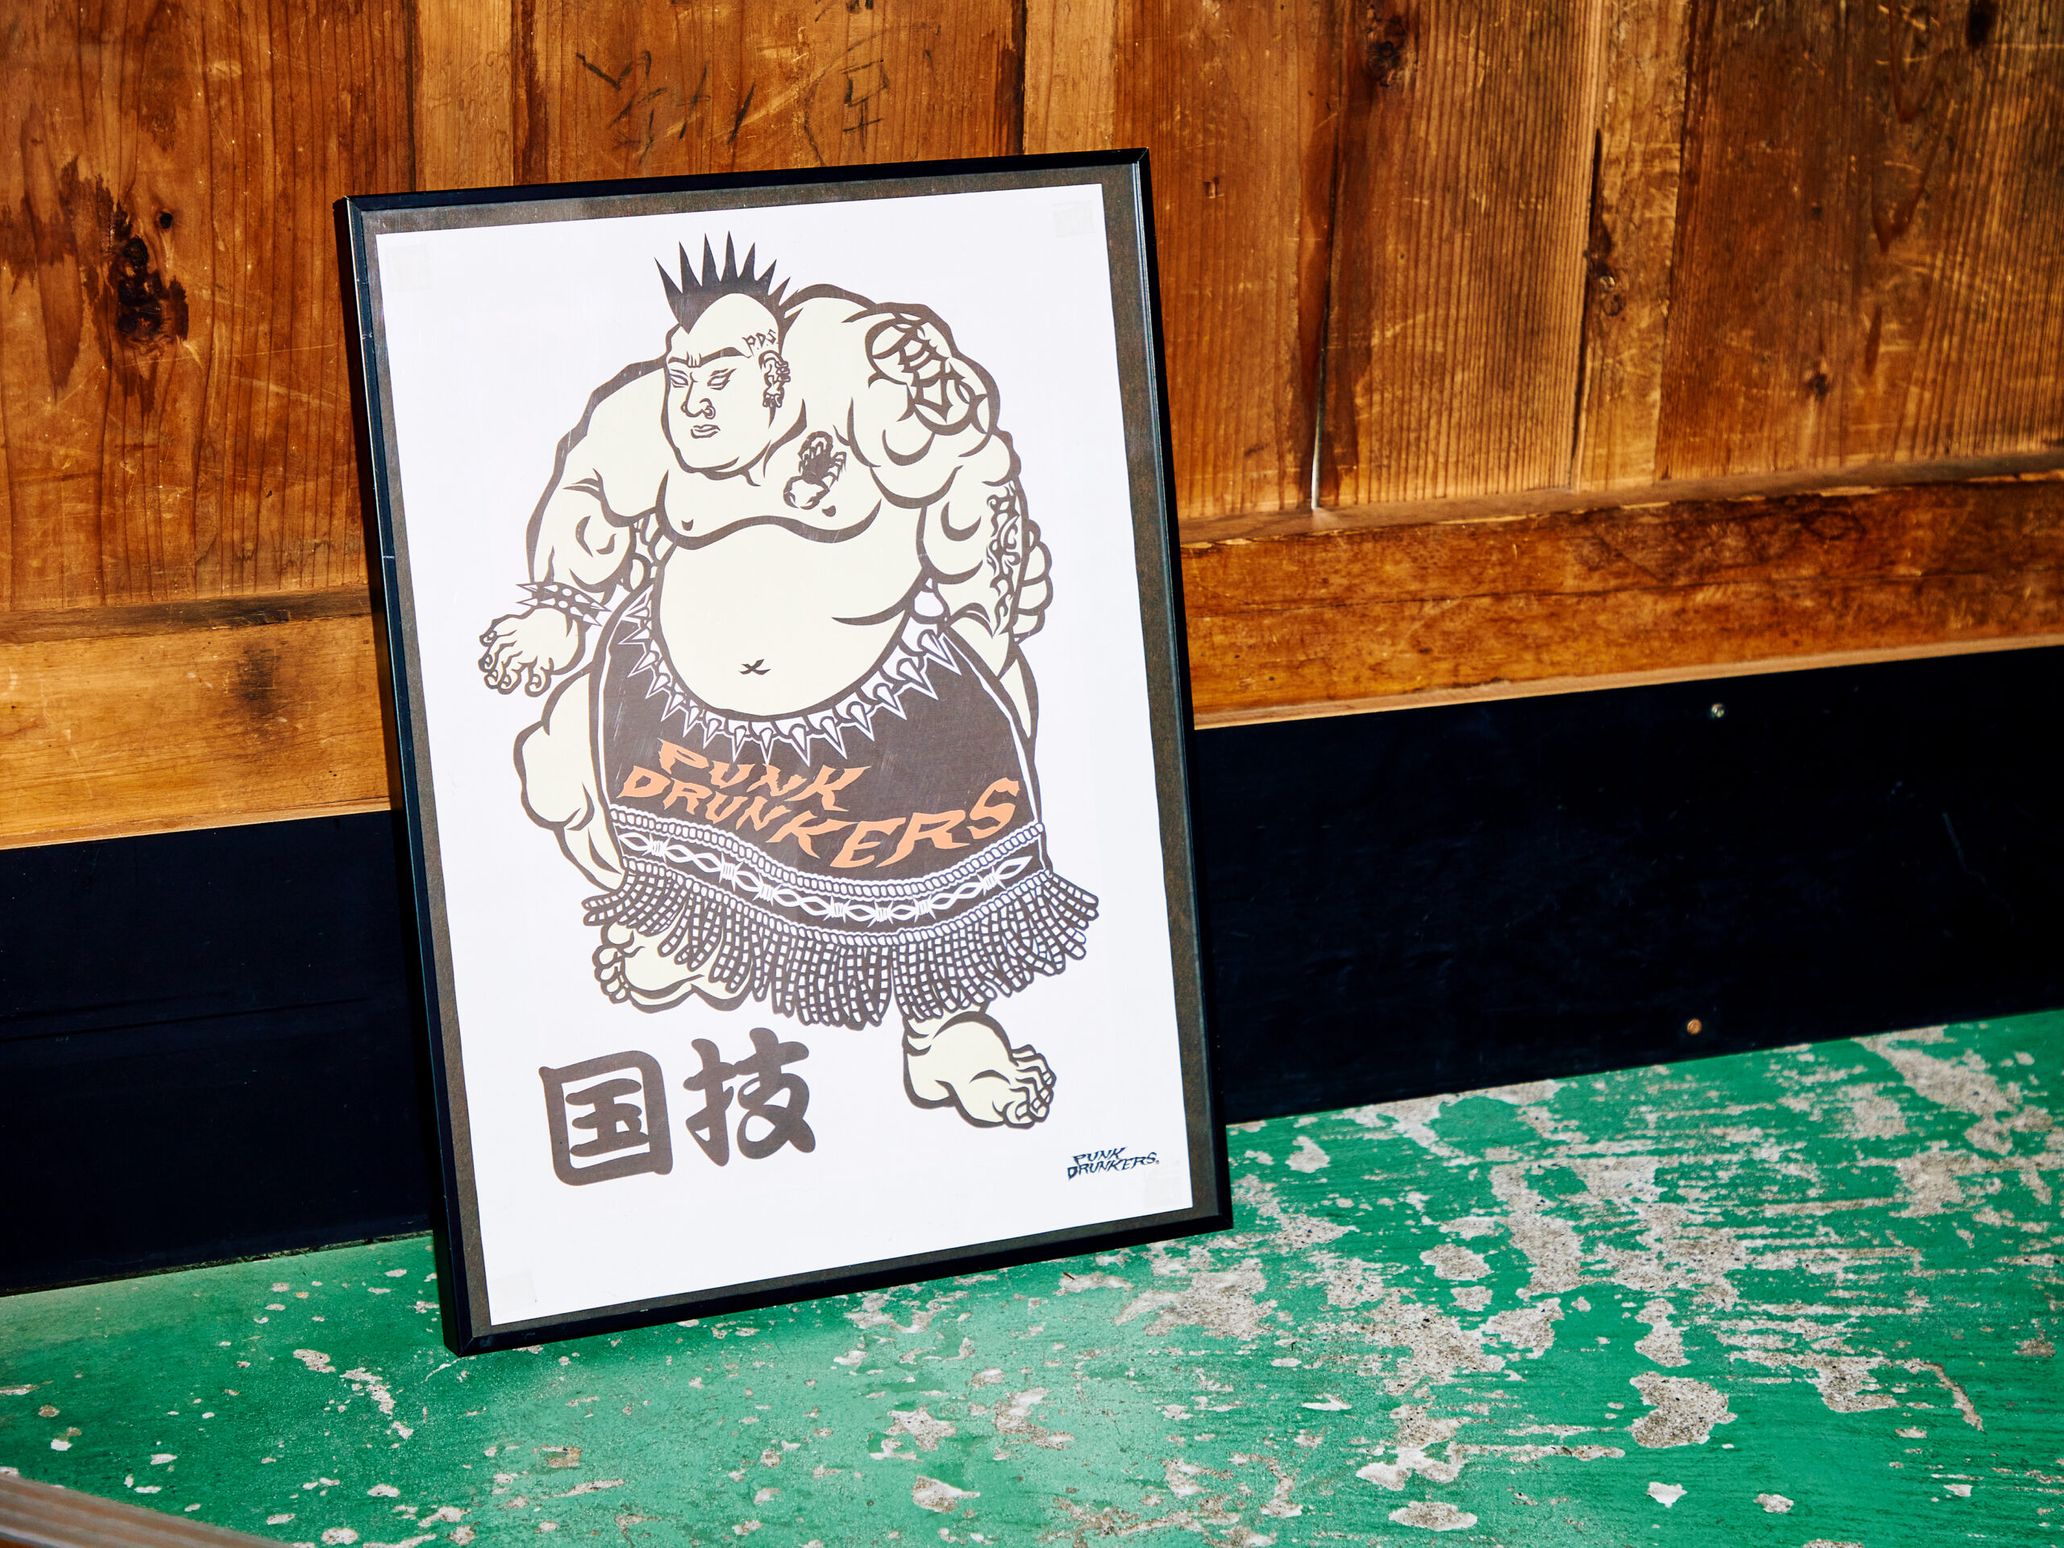 “Kokugi Ver. 02,” an impactful drawing with a sumo wrestler with a mohawk and many tattoos